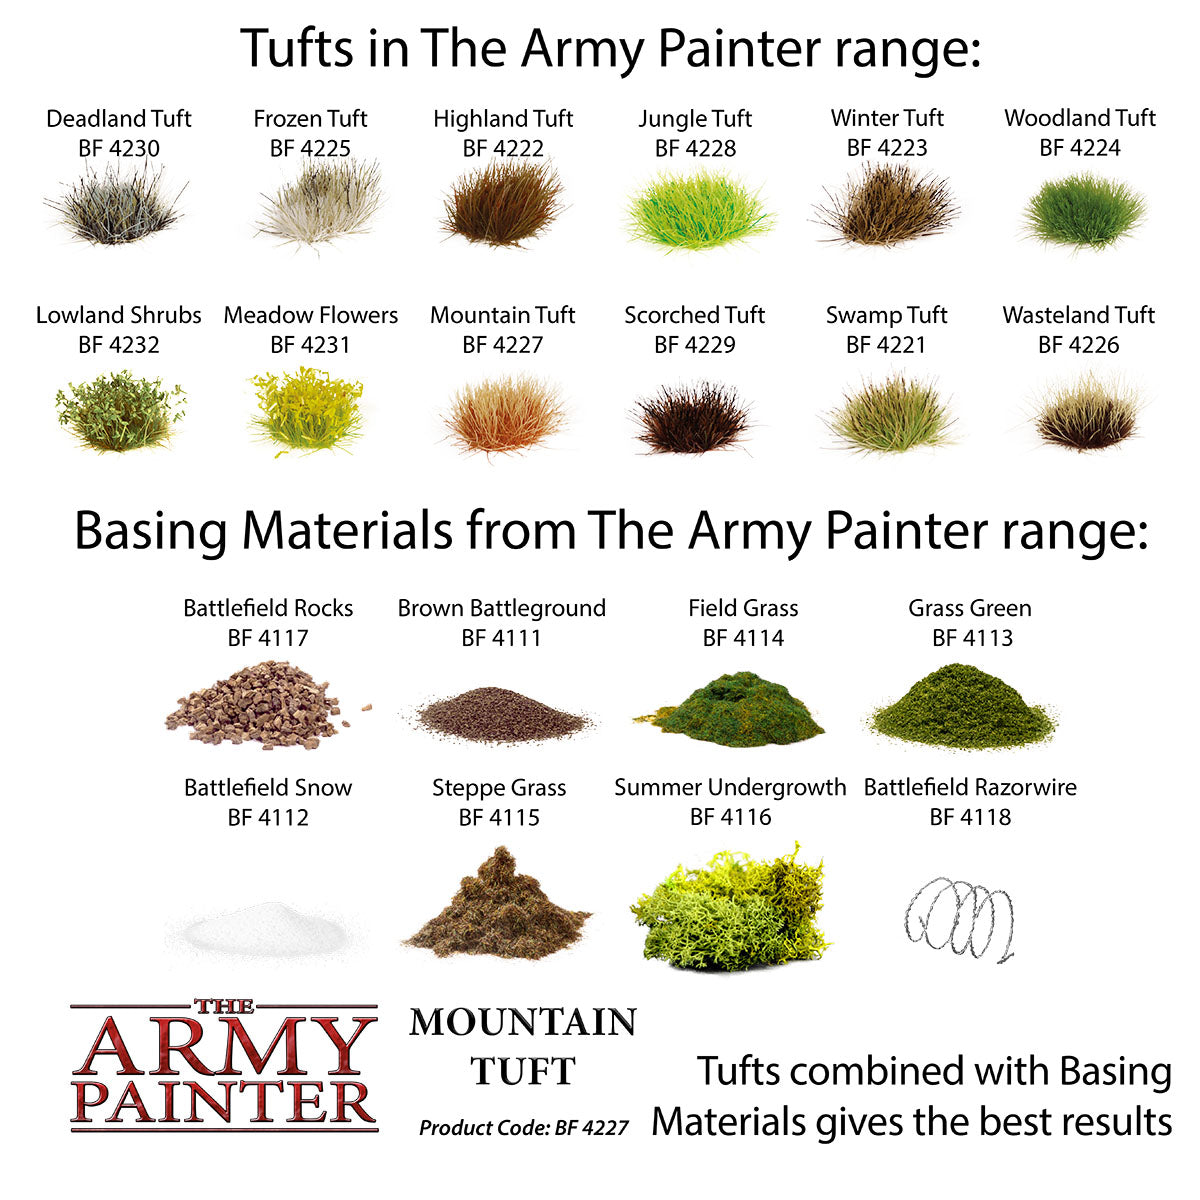 The Army Painter - Mountain Tuft BF4227